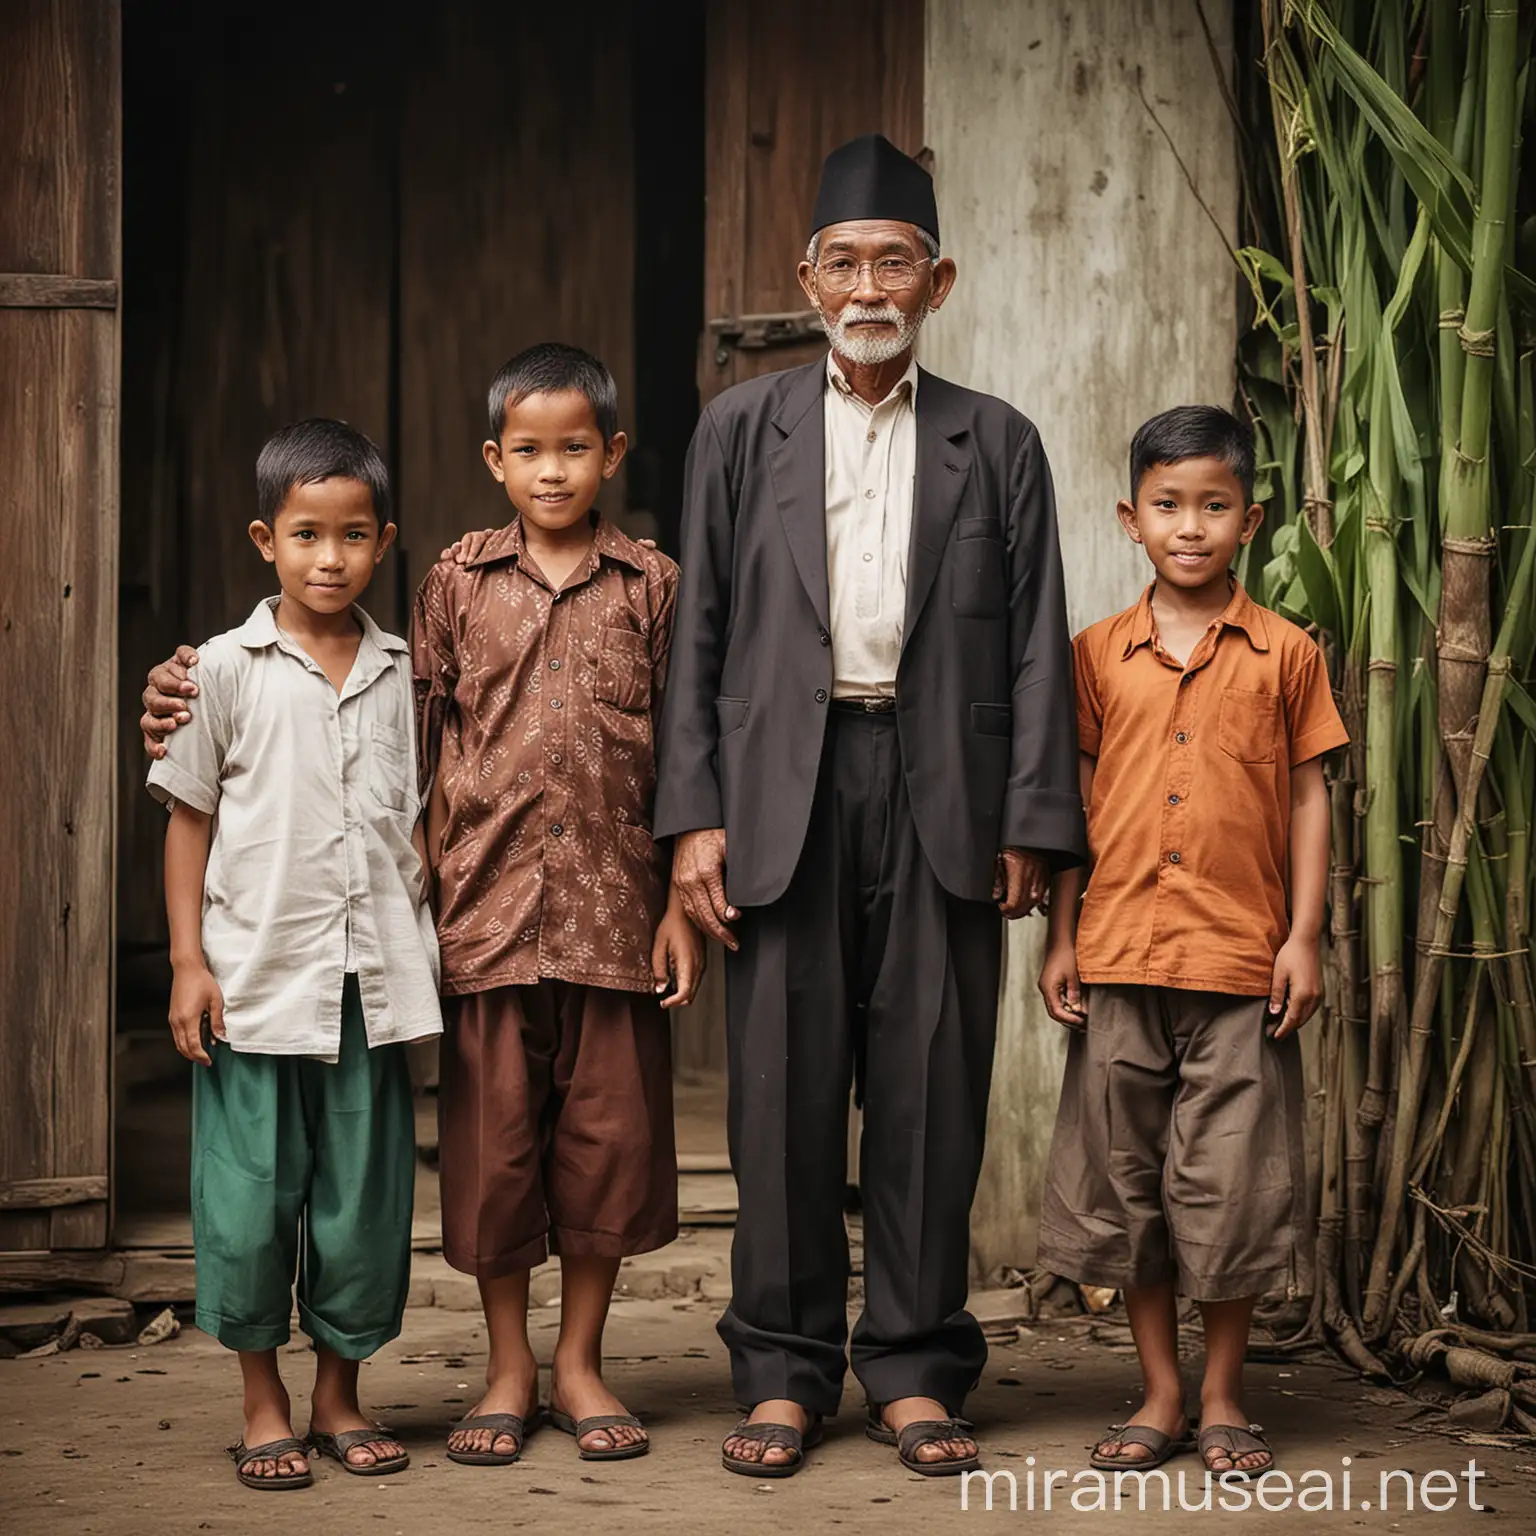 Javanese Grandfather Bonding with Children in Humble Java Indonesia